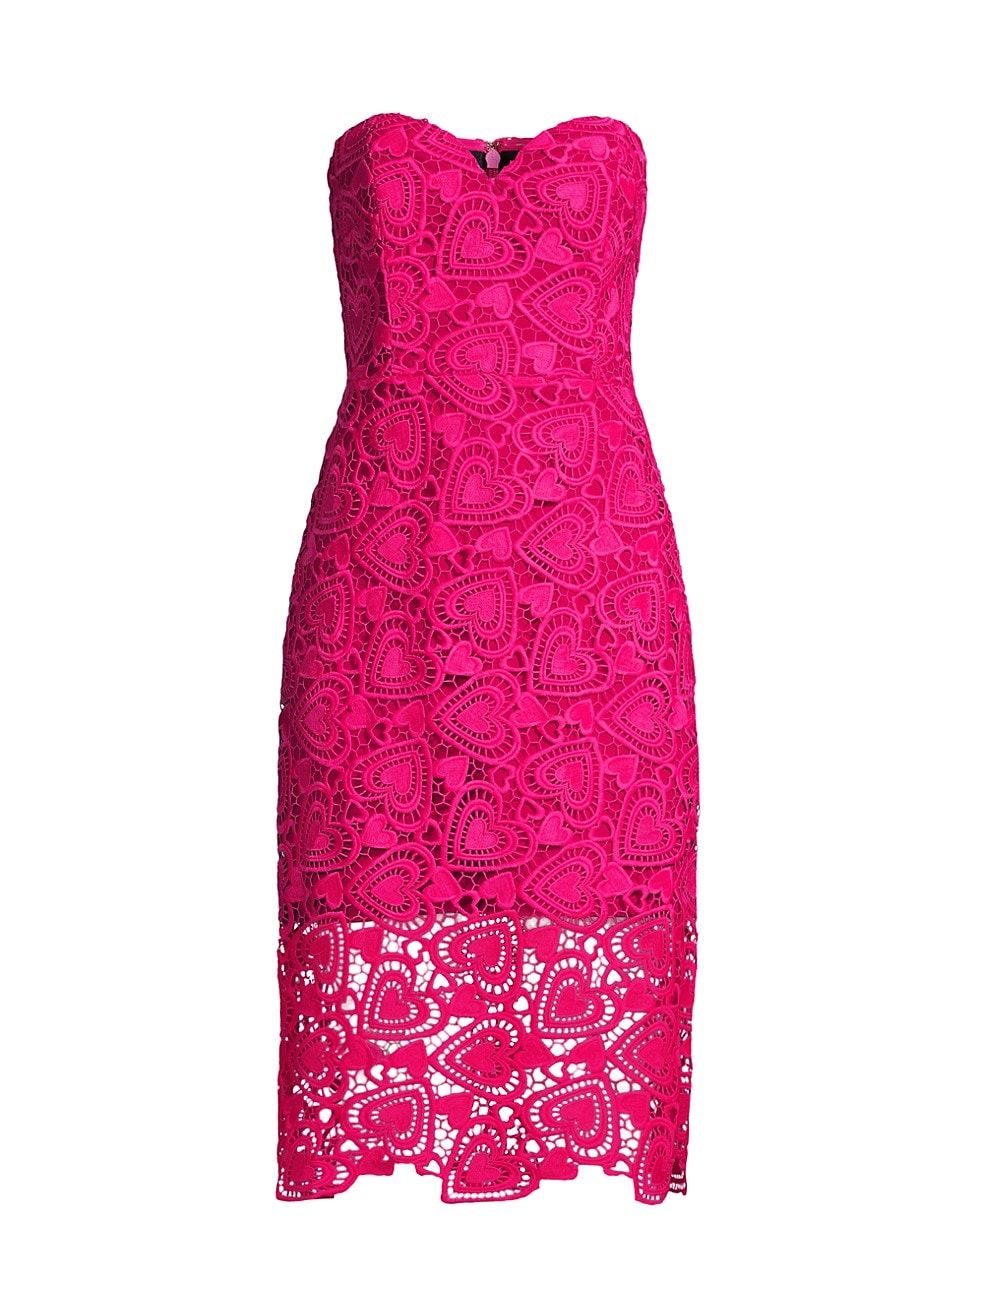 Milly Luisa Heart Lace Strapless Sheath Dress | Saks Fifth Avenue